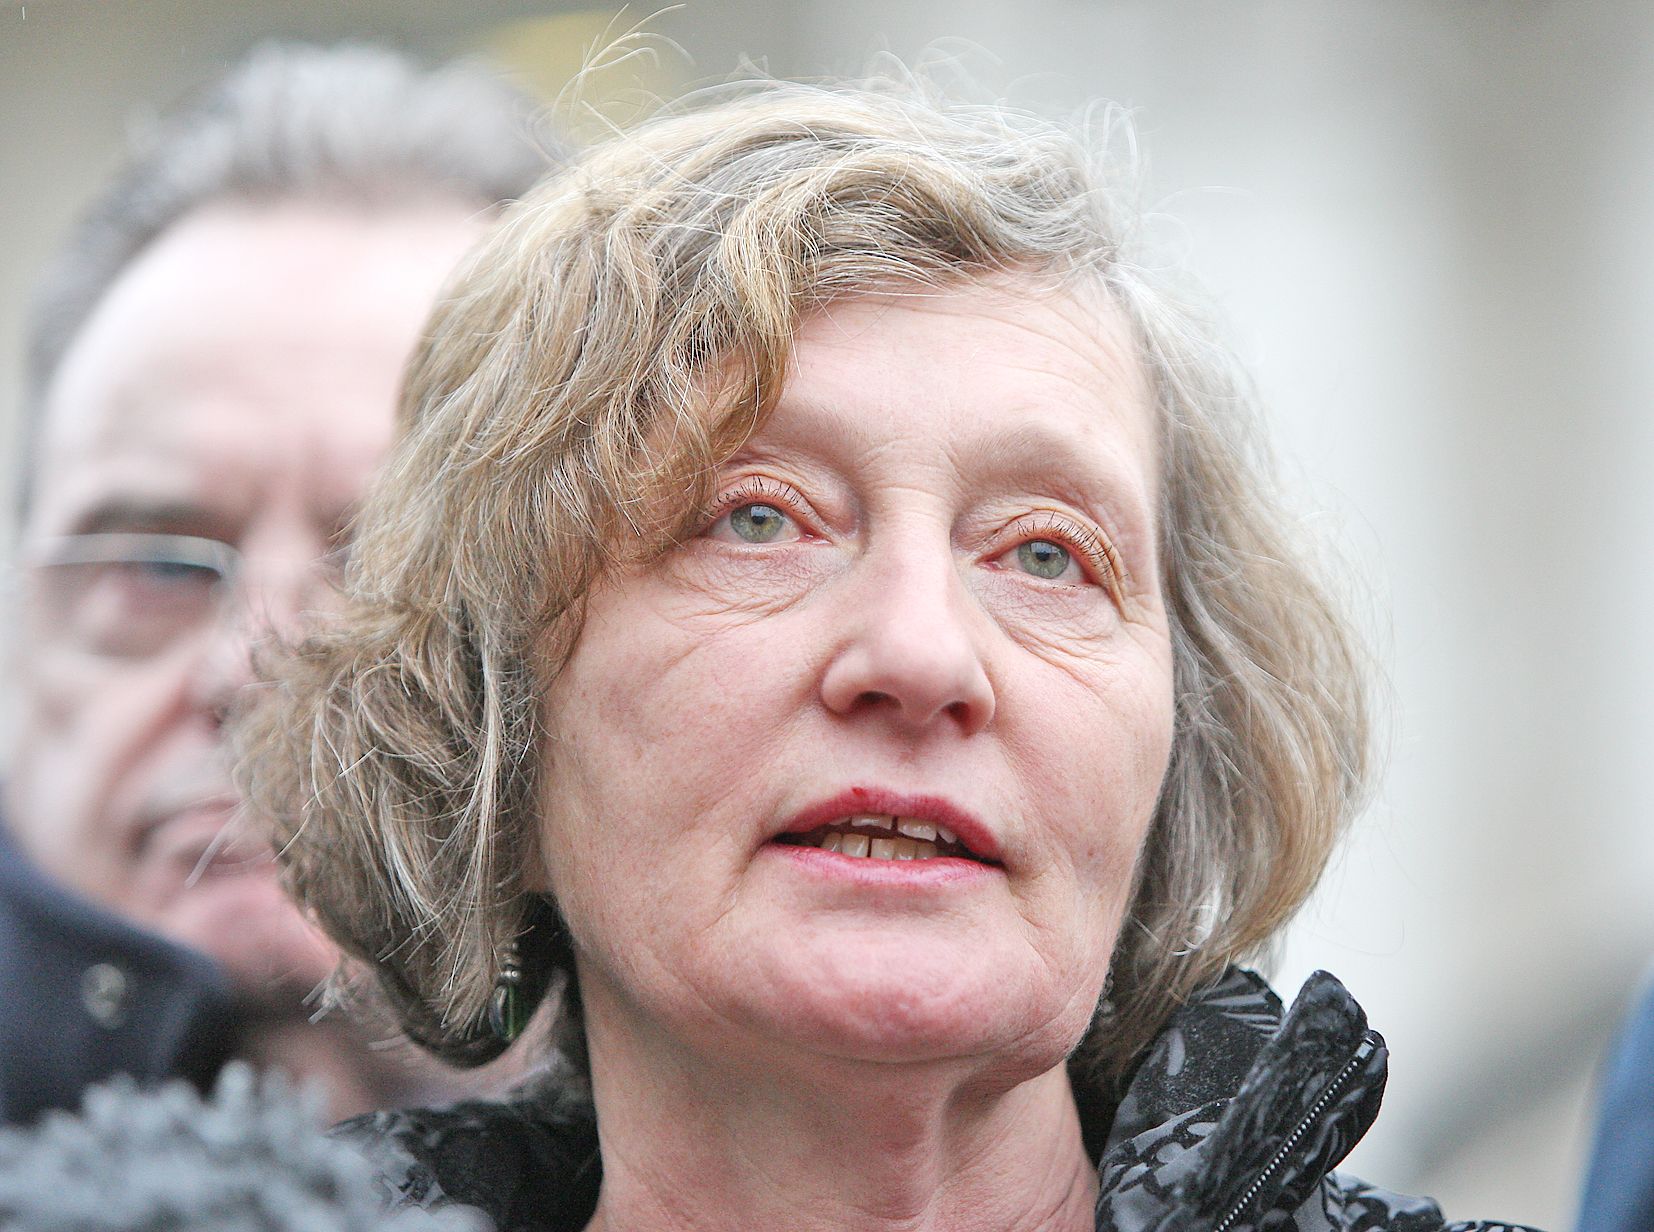 TRUTH RECOVERY: A vindication for Geraldine Finucane is a vindication for all victims and survivors